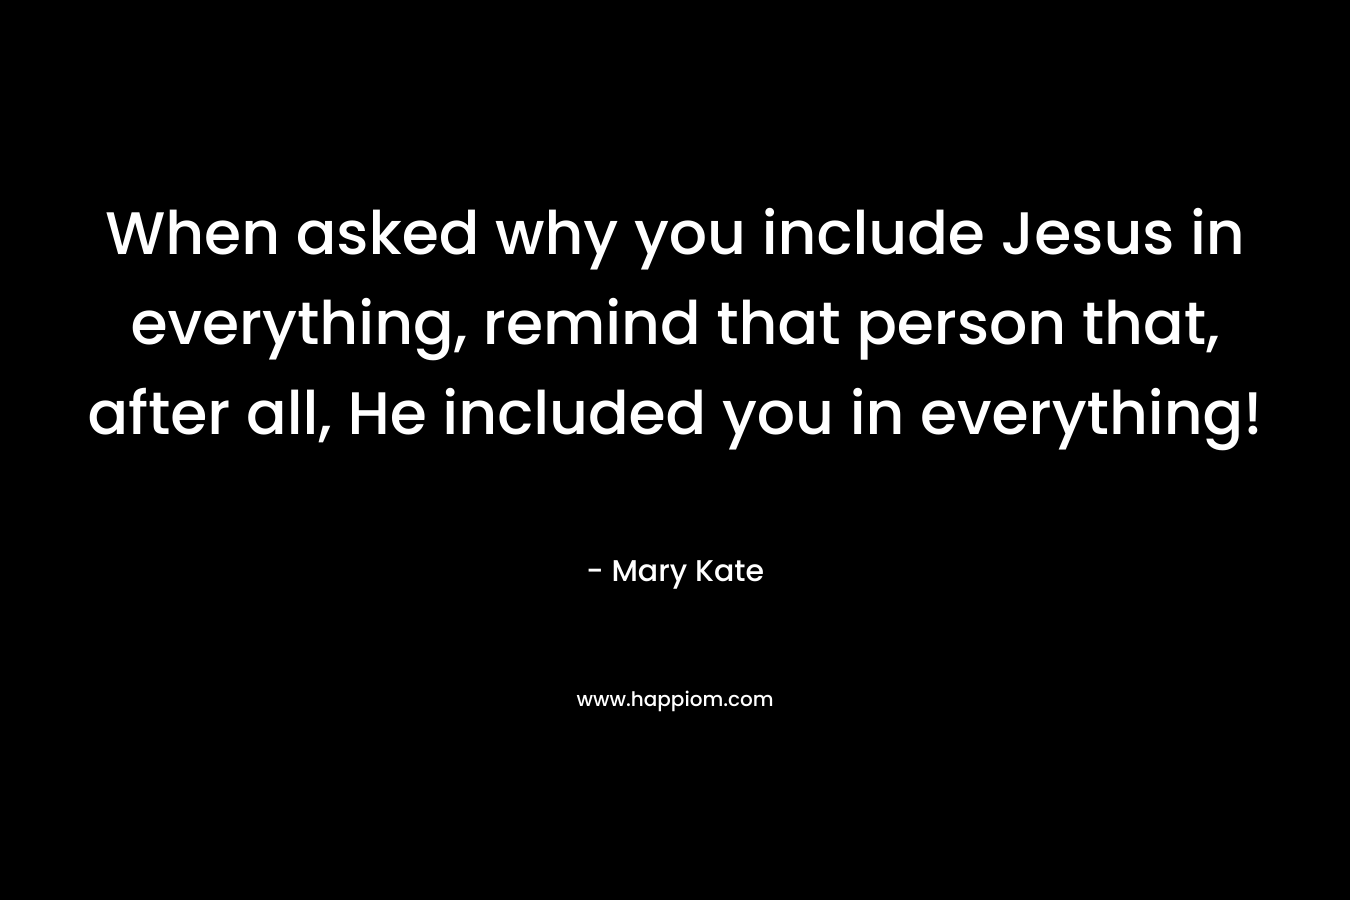 When asked why you include Jesus in everything, remind that person that, after all, He included you in everything!